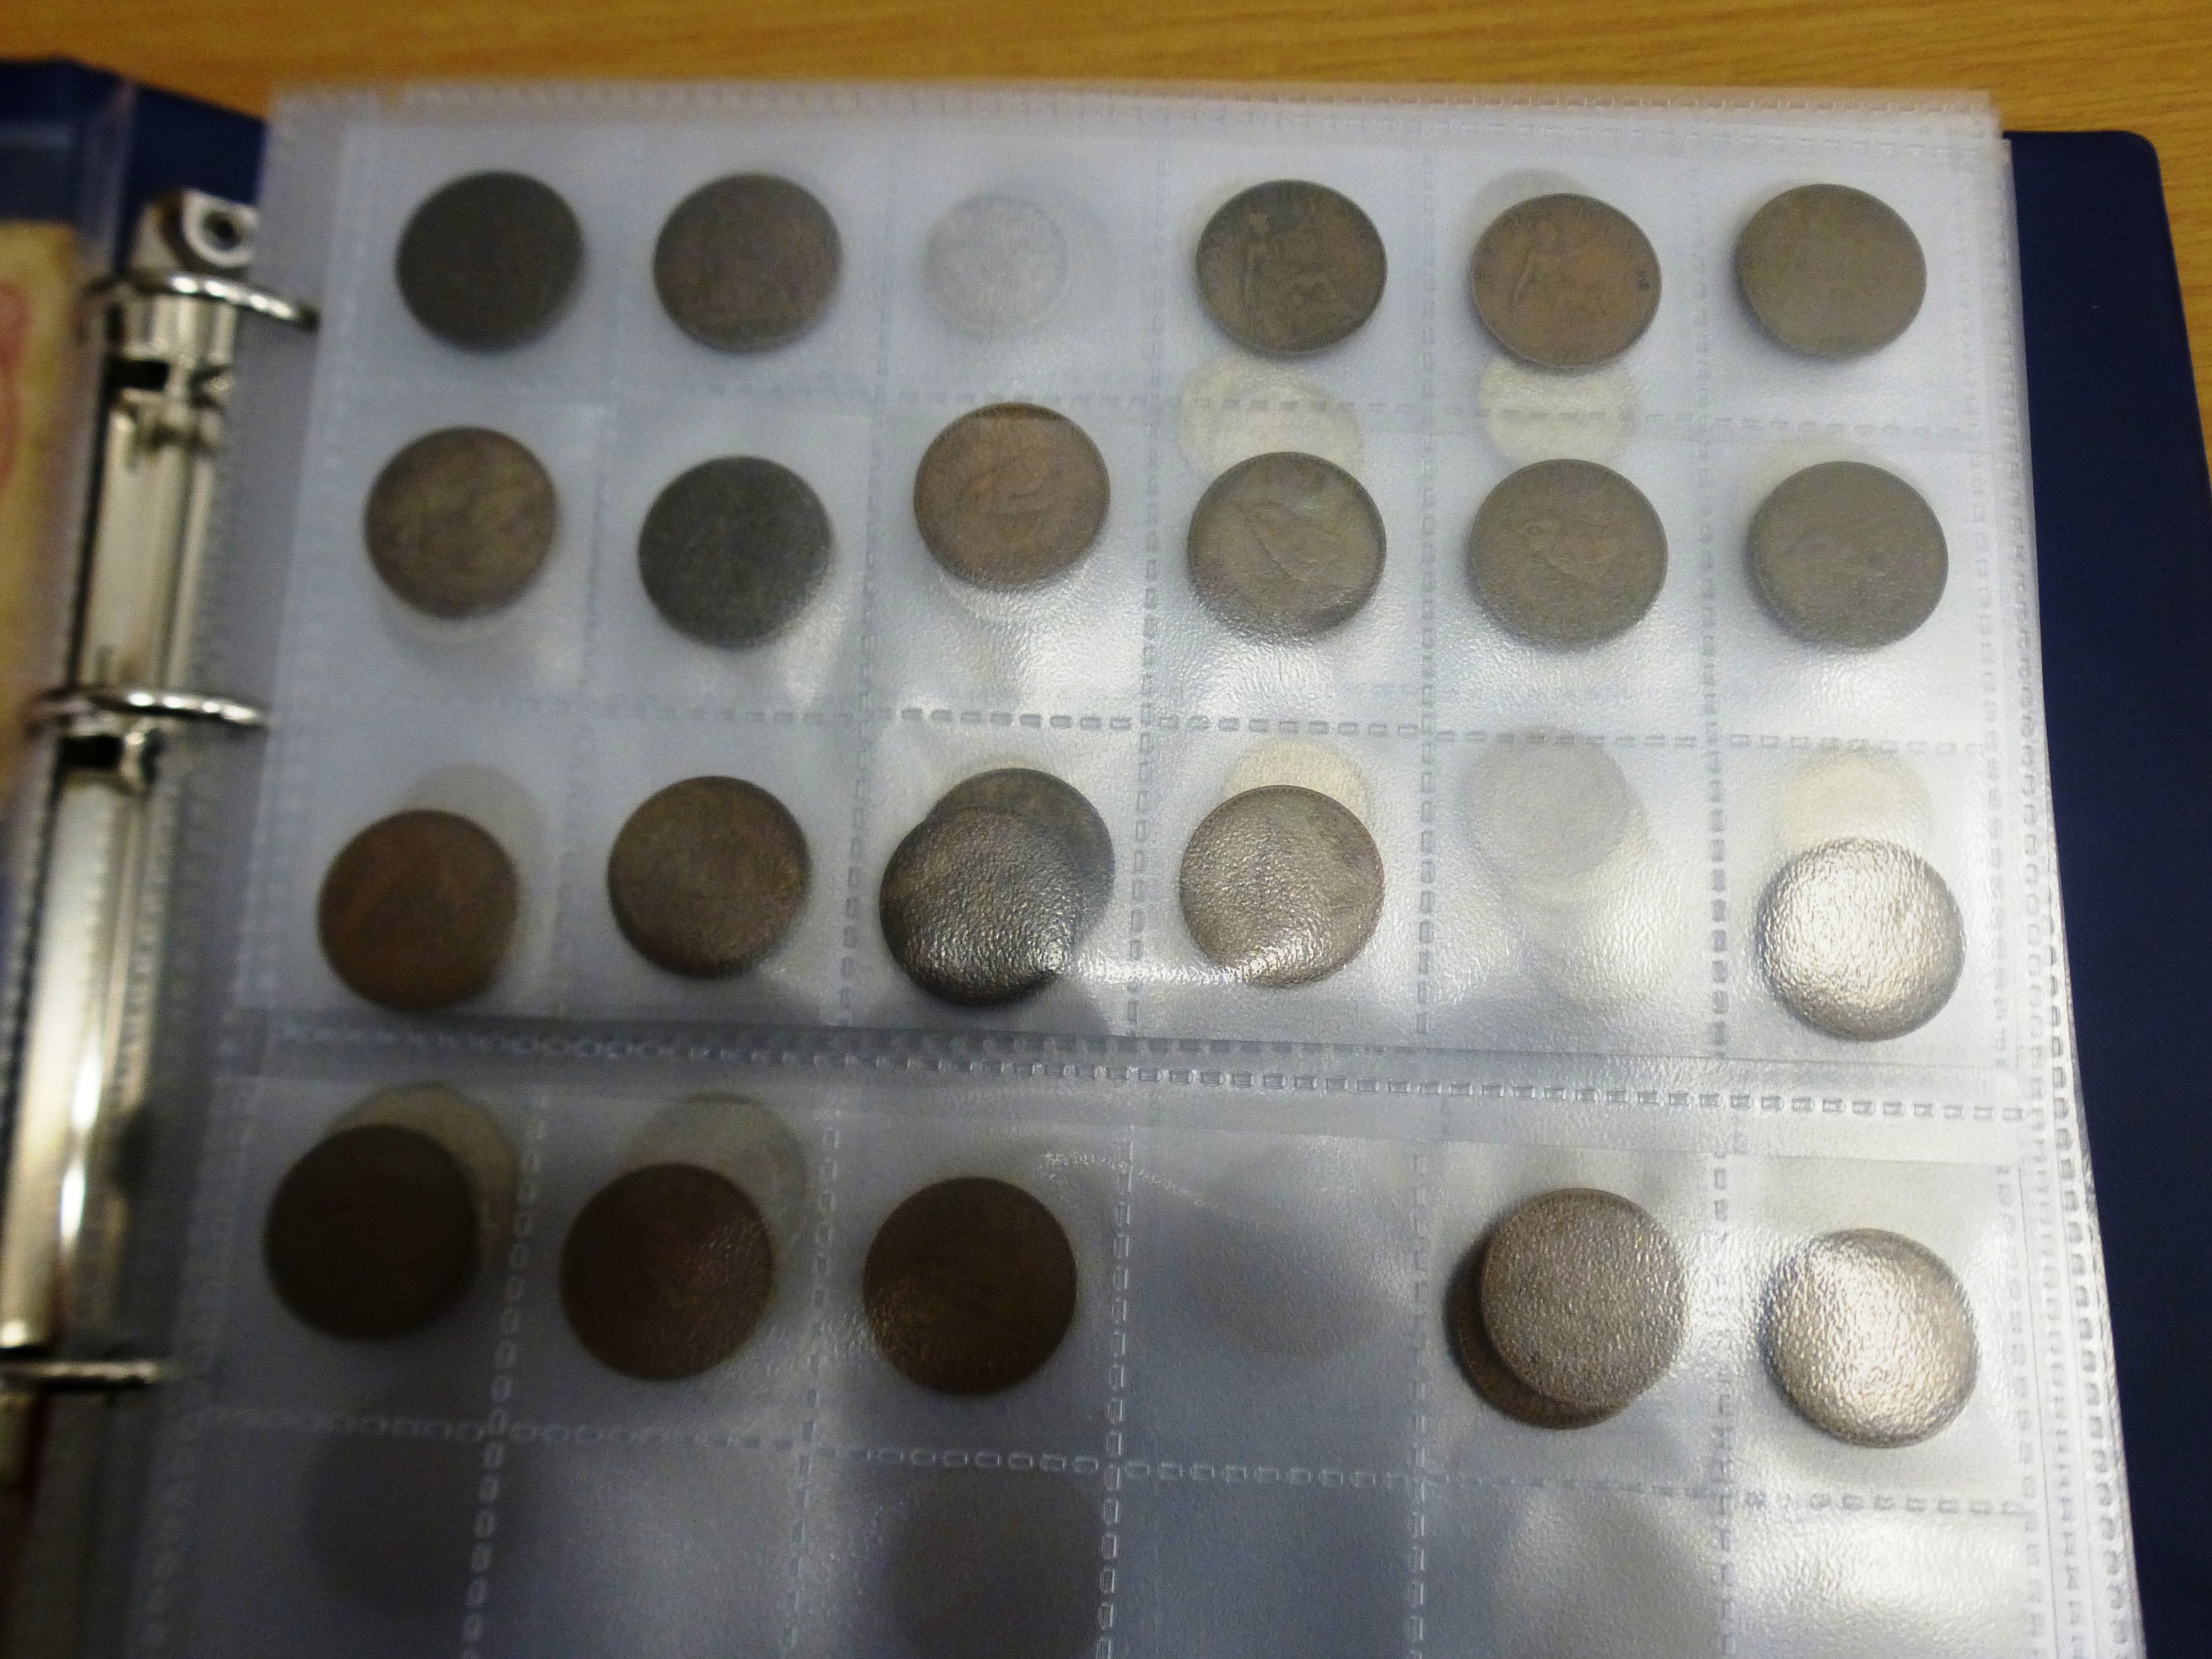 COIN ALBUM OF ASSORTED COINS AND BANK NOTES MOSTLY UK INCLUDING SILVER COINAGE AND 1890 CROWN - Image 3 of 11